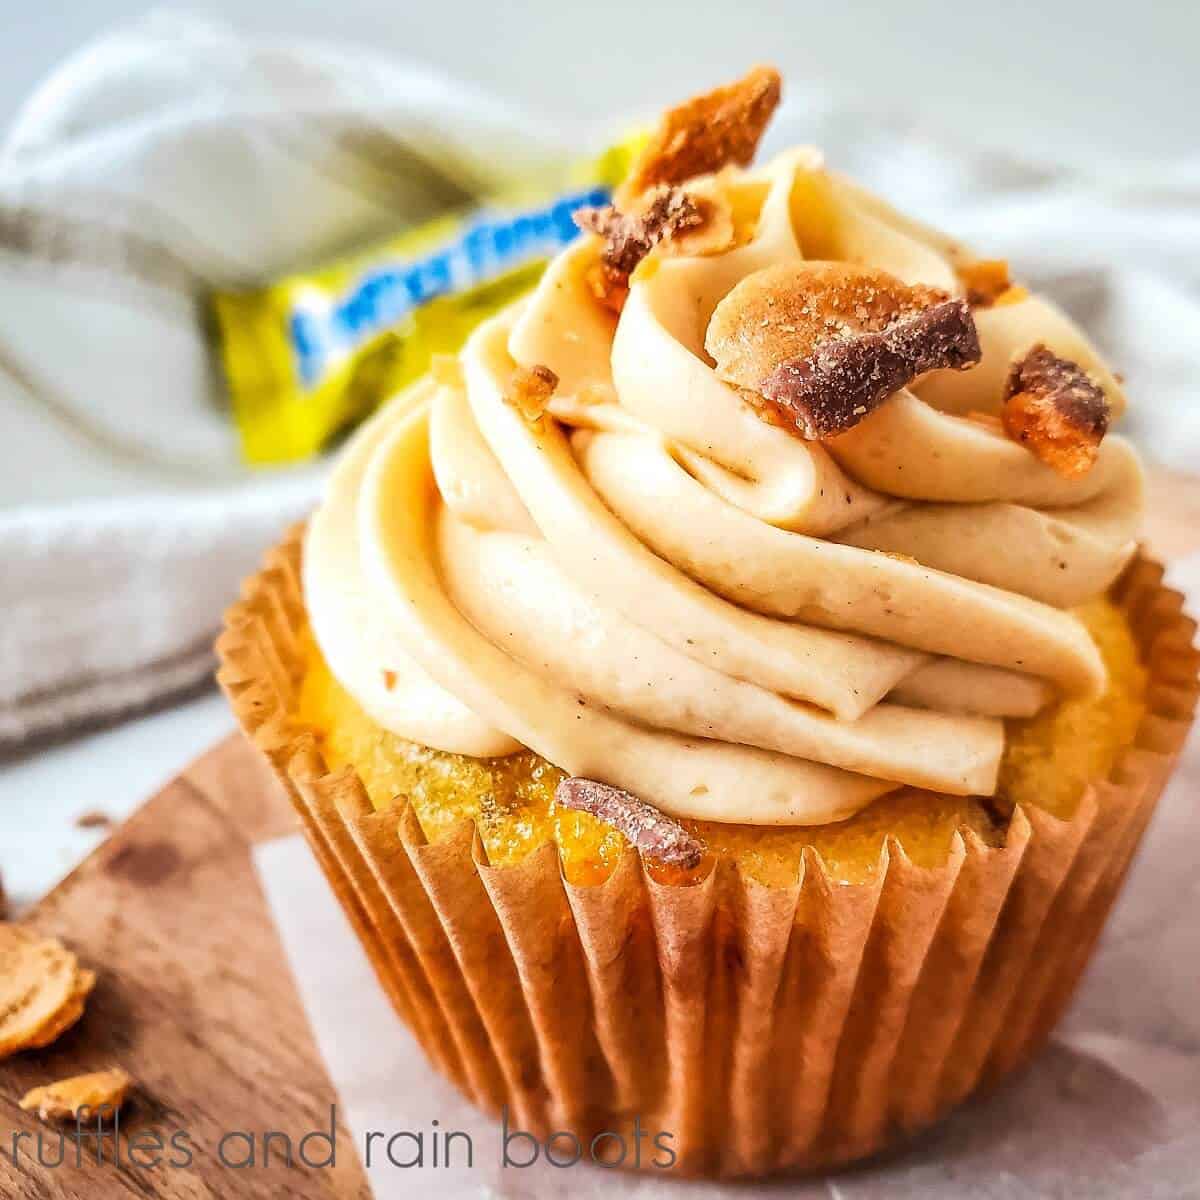 A square close up of a Butterfinger cupcake on a wooden cutting board with a Butterfinger candy bar in the background next to a white towel.